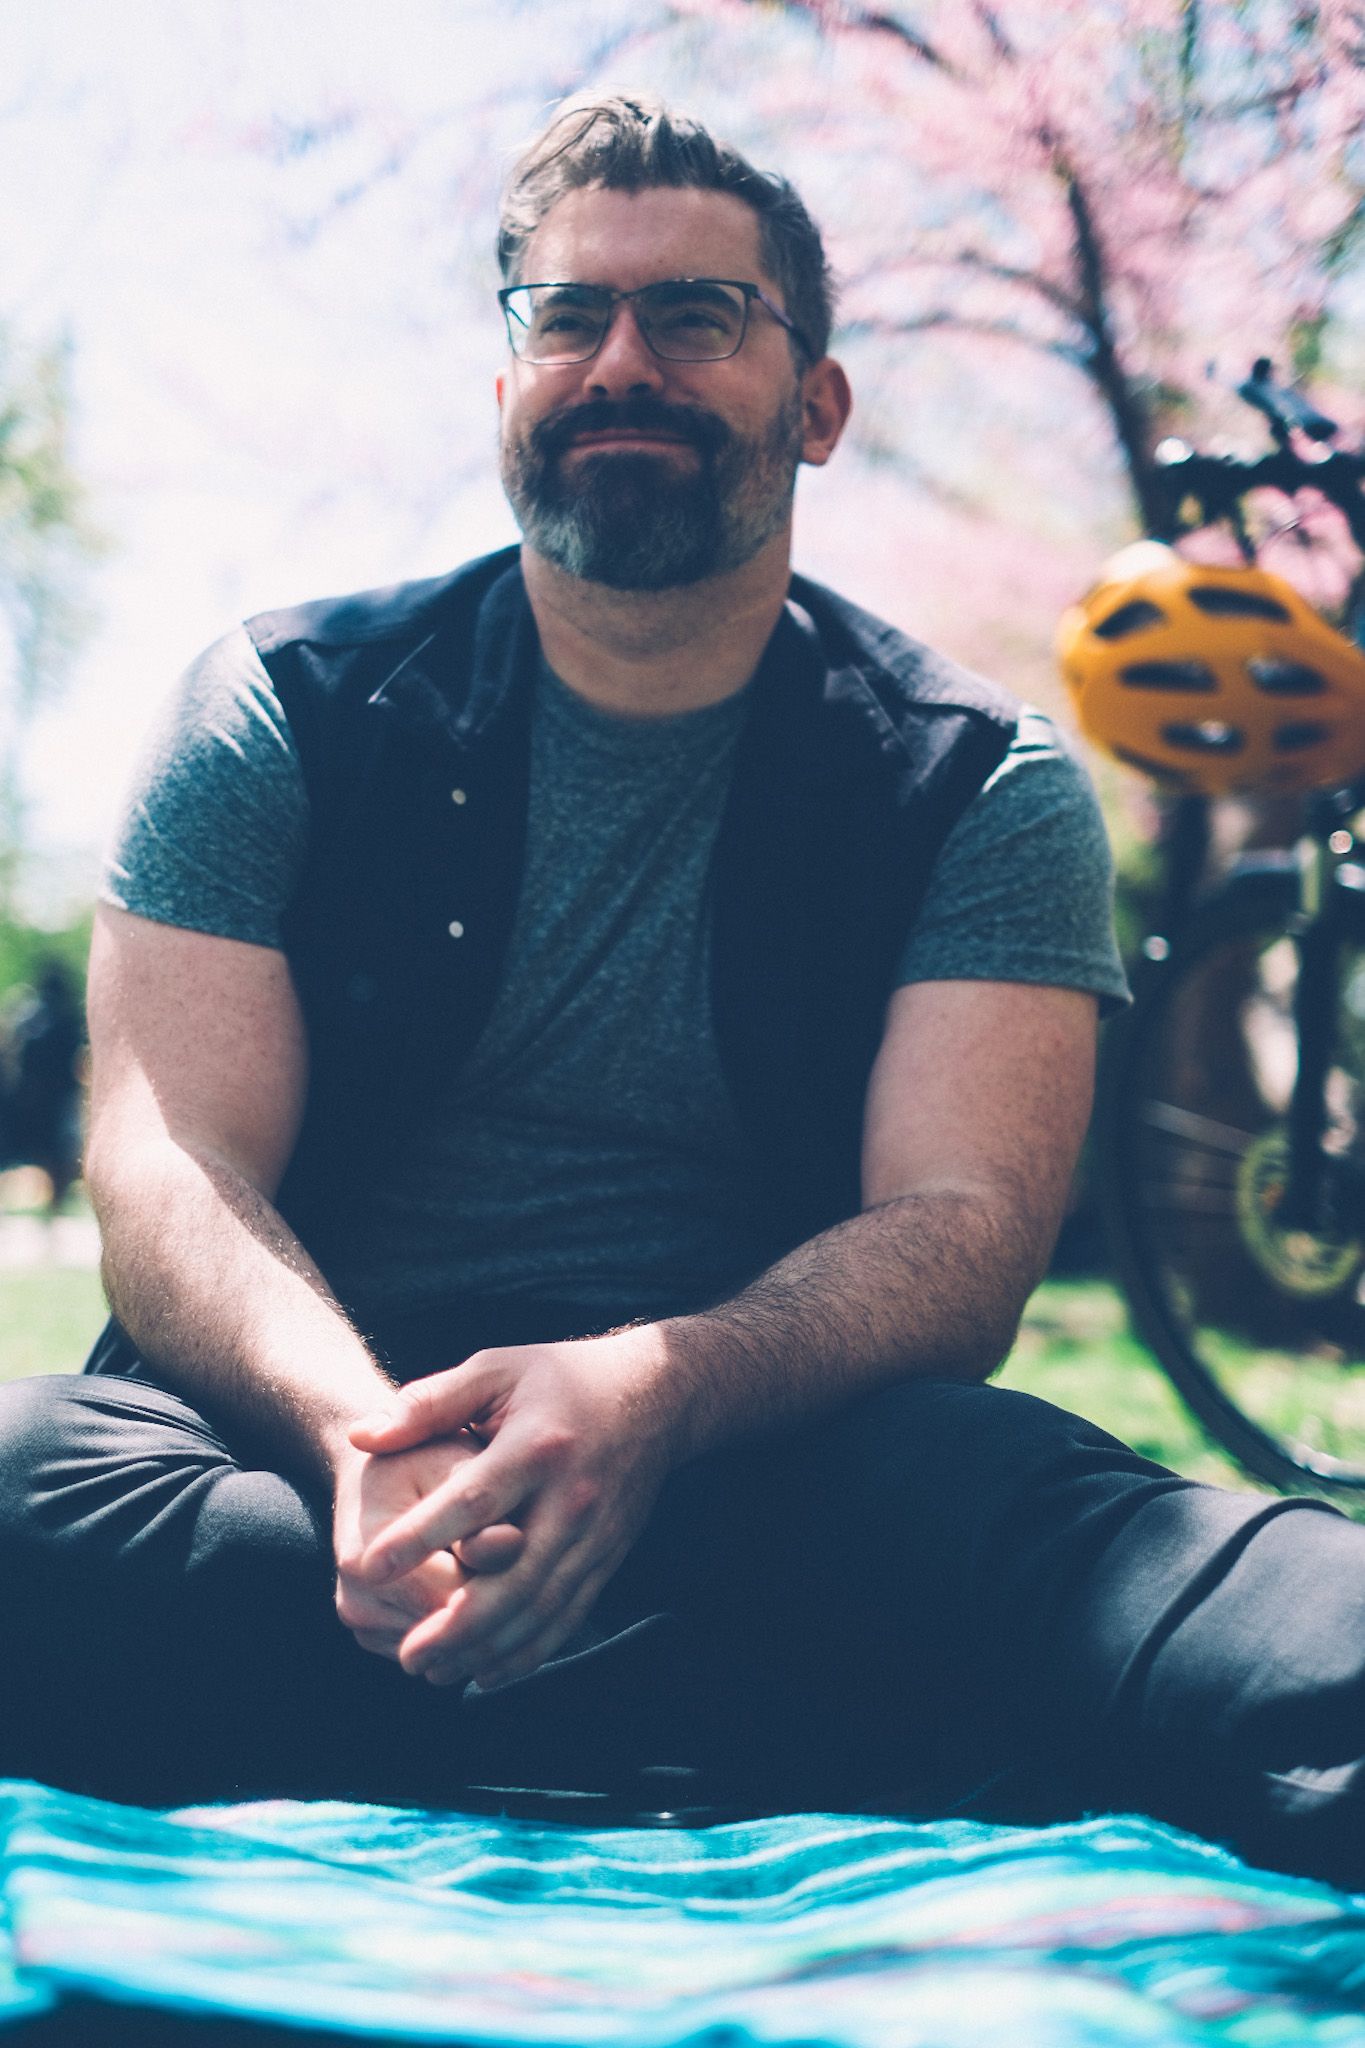 A man with dark hair, glasses, and a beard sits on a blanket in a park, smiling into the distance, his bike and helmet in the background against a cherry blossom tree.